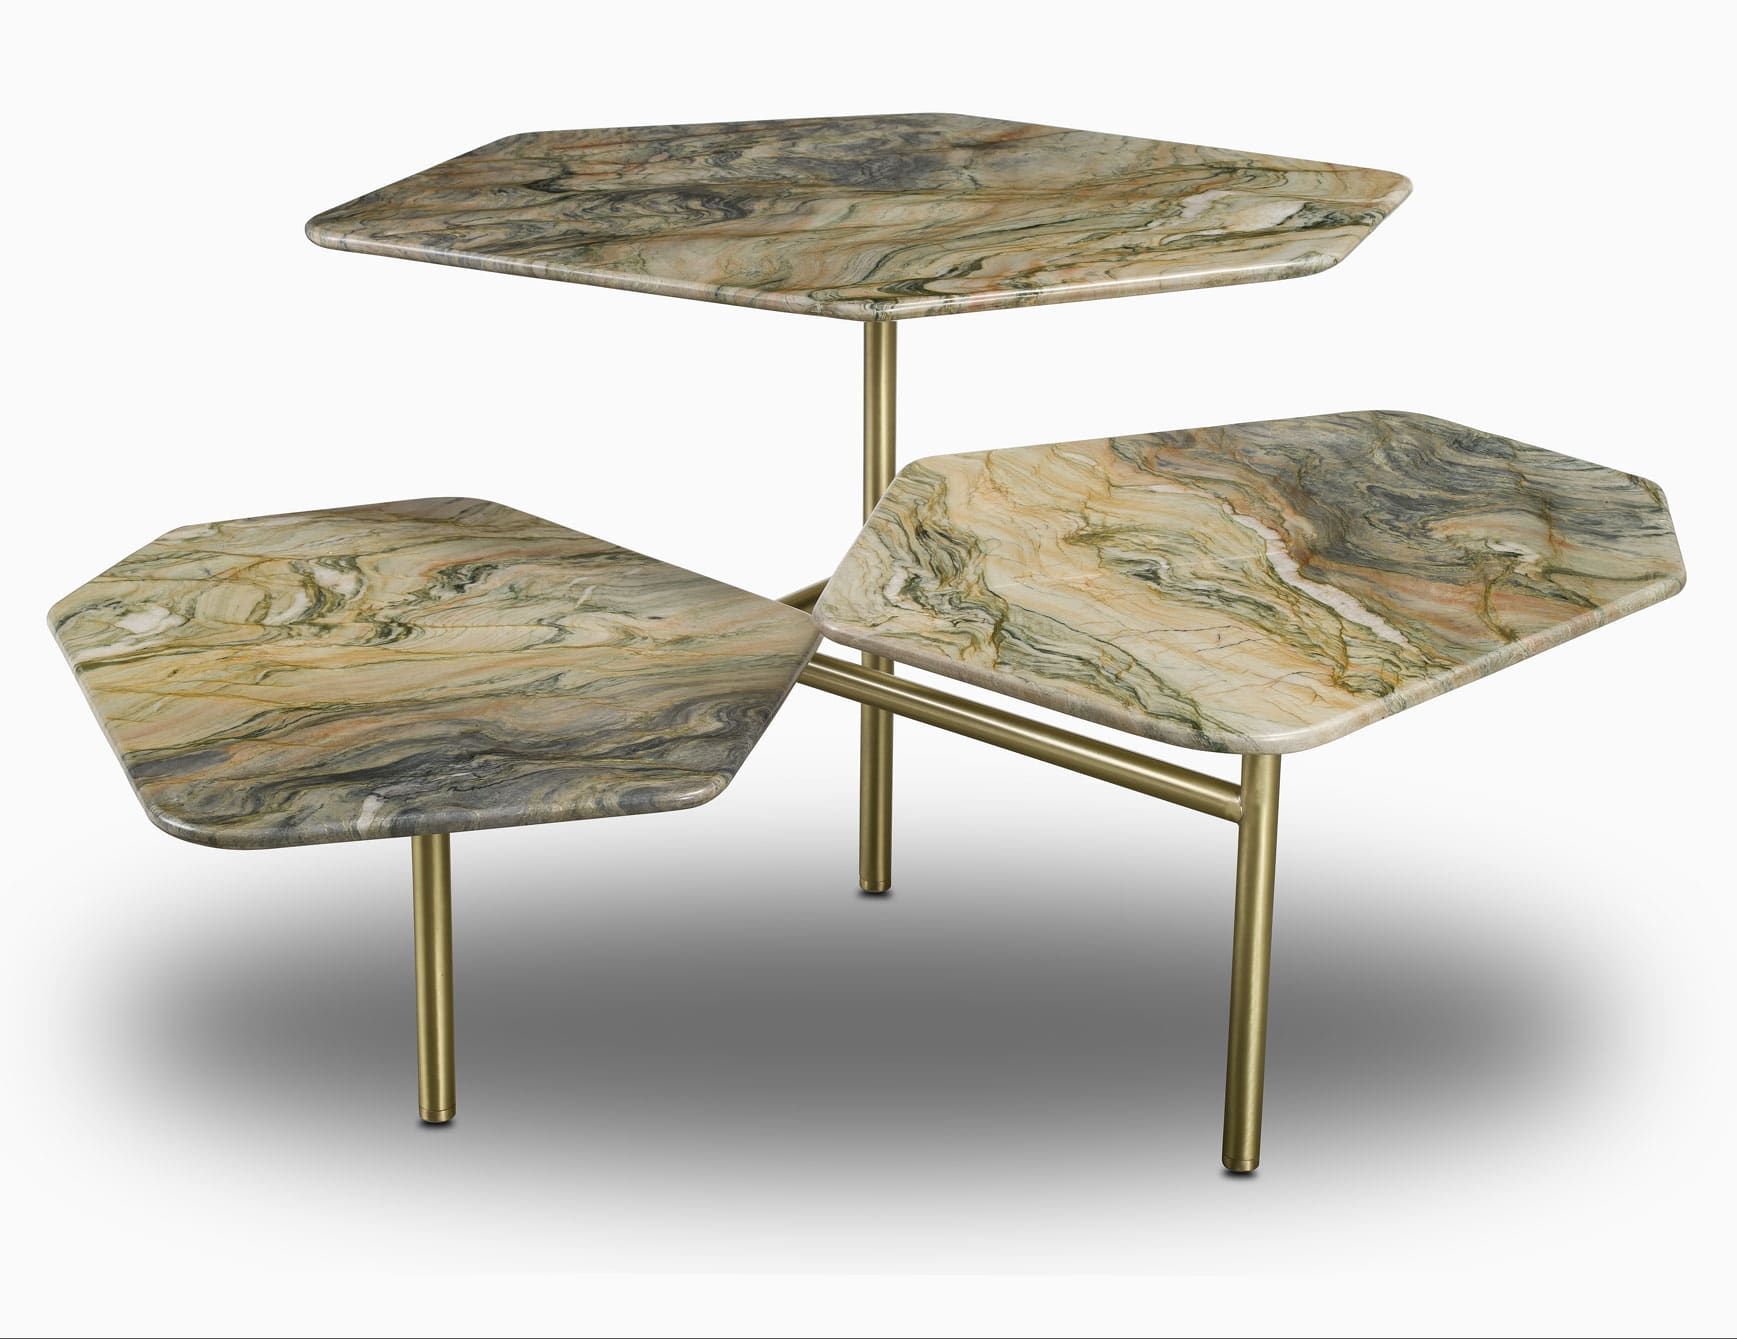 Molecole B contemporary Italian side table with green marble